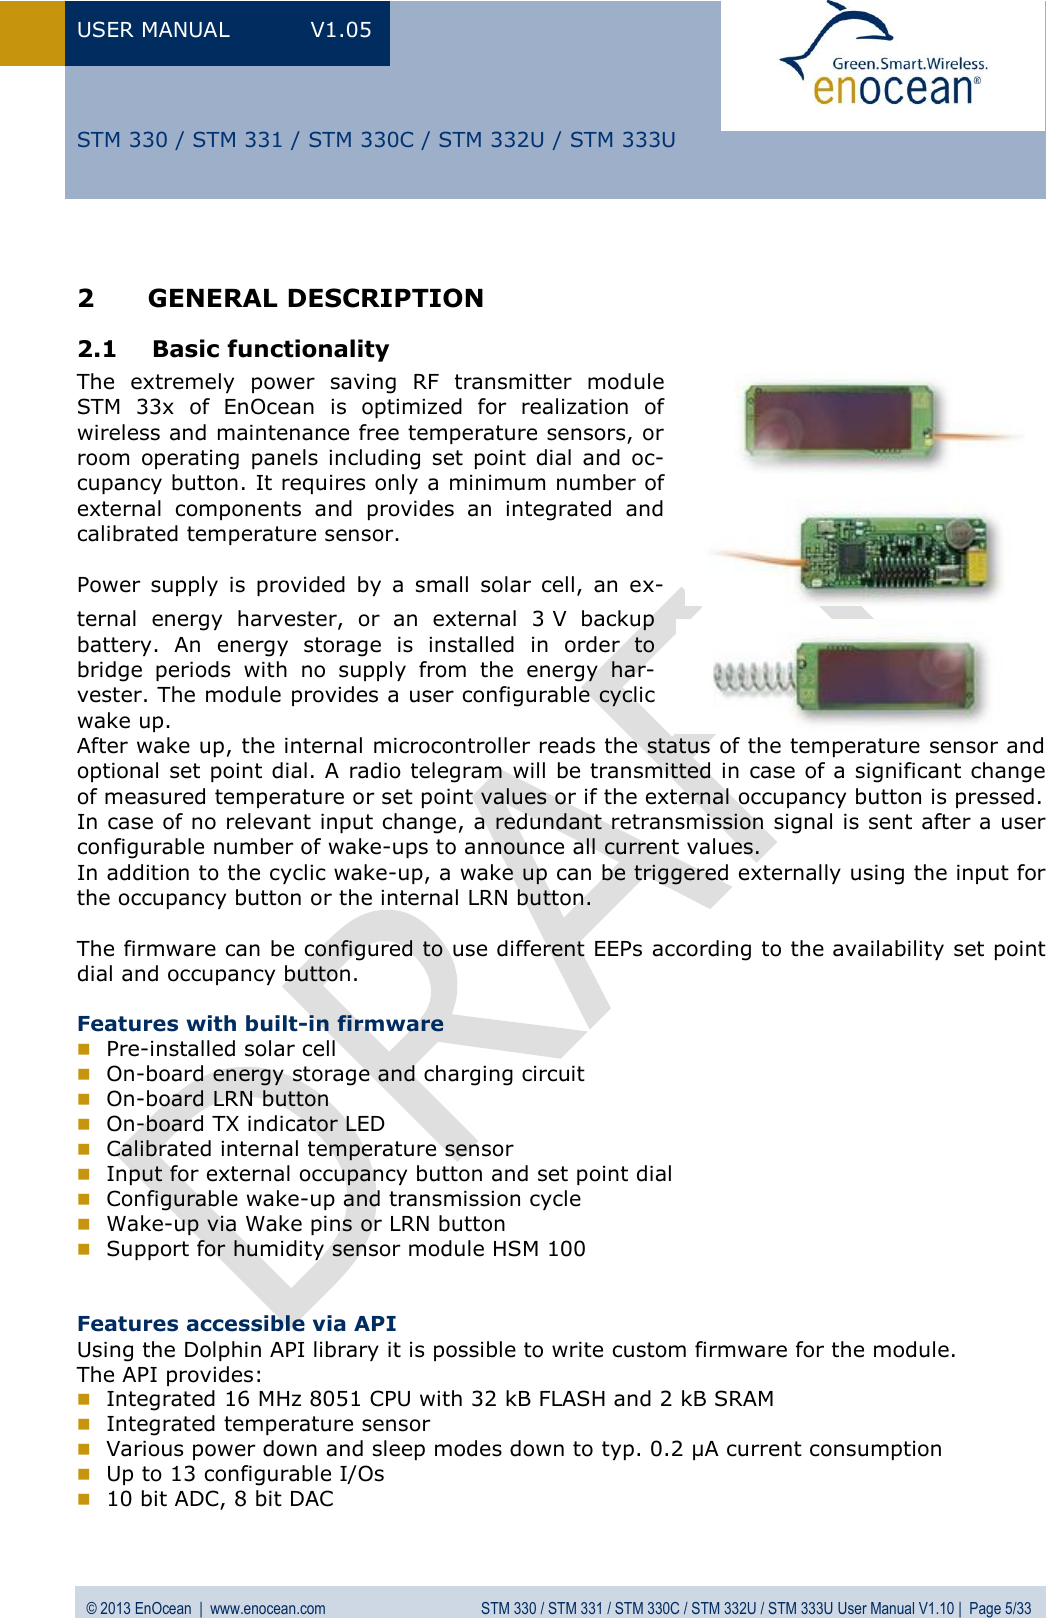 USER MANUAL  V1.05  © 2013 EnOcean  |  www.enocean.com  STM 330 / STM 331 / STM 330C / STM 332U / STM 333U User Manual V1.10 |  Page 5/33   STM 330 / STM 331 / STM 330C / STM 332U / STM 333U  2 GENERAL DESCRIPTION   2.1 Basic functionality  The  extremely  power  saving  RF  transmitter  module STM  33x  of  EnOcean  is  optimized  for  realization  of wireless and maintenance free temperature sensors, or room operating  panels including  set point  dial  and  oc-cupancy button. It requires only a minimum number of external  components  and  provides  an  integrated  and calibrated temperature sensor.  Power  supply  is  provided  by  a  small  solar  cell,  an  ex-ternal  energy  harvester,  or  an  external  3 V  backup battery.  An  energy  storage  is  installed  in  order  to bridge  periods  with  no  supply  from  the  energy  har-vester. The module provides a user configurable cyclic wake up.  After wake up, the internal microcontroller reads the status of the temperature sensor and optional set point dial. A radio telegram will be transmitted in case of a significant change of measured temperature or set point values or if the external occupancy button is pressed.  In case of no relevant input change, a redundant retransmission signal is sent after a user configurable number of wake-ups to announce all current values.  In addition to the cyclic wake-up, a wake up can be triggered externally using the input for the occupancy button or the internal LRN button.  The firmware can be configured to use different EEPs according to the availability set point dial and occupancy button.   Features with built-in firmware  Pre-installed solar cell  On-board energy storage and charging circuit  On-board LRN button   On-board TX indicator LED  Calibrated internal temperature sensor  Input for external occupancy button and set point dial  Configurable wake-up and transmission cycle  Wake-up via Wake pins or LRN button  Support for humidity sensor module HSM 100   Features accessible via API Using the Dolphin API library it is possible to write custom firmware for the module. The API provides:  Integrated 16 MHz 8051 CPU with 32 kB FLASH and 2 kB SRAM  Integrated temperature sensor  Various power down and sleep modes down to typ. 0.2 µA current consumption  Up to 13 configurable I/Os  10 bit ADC, 8 bit DAC 